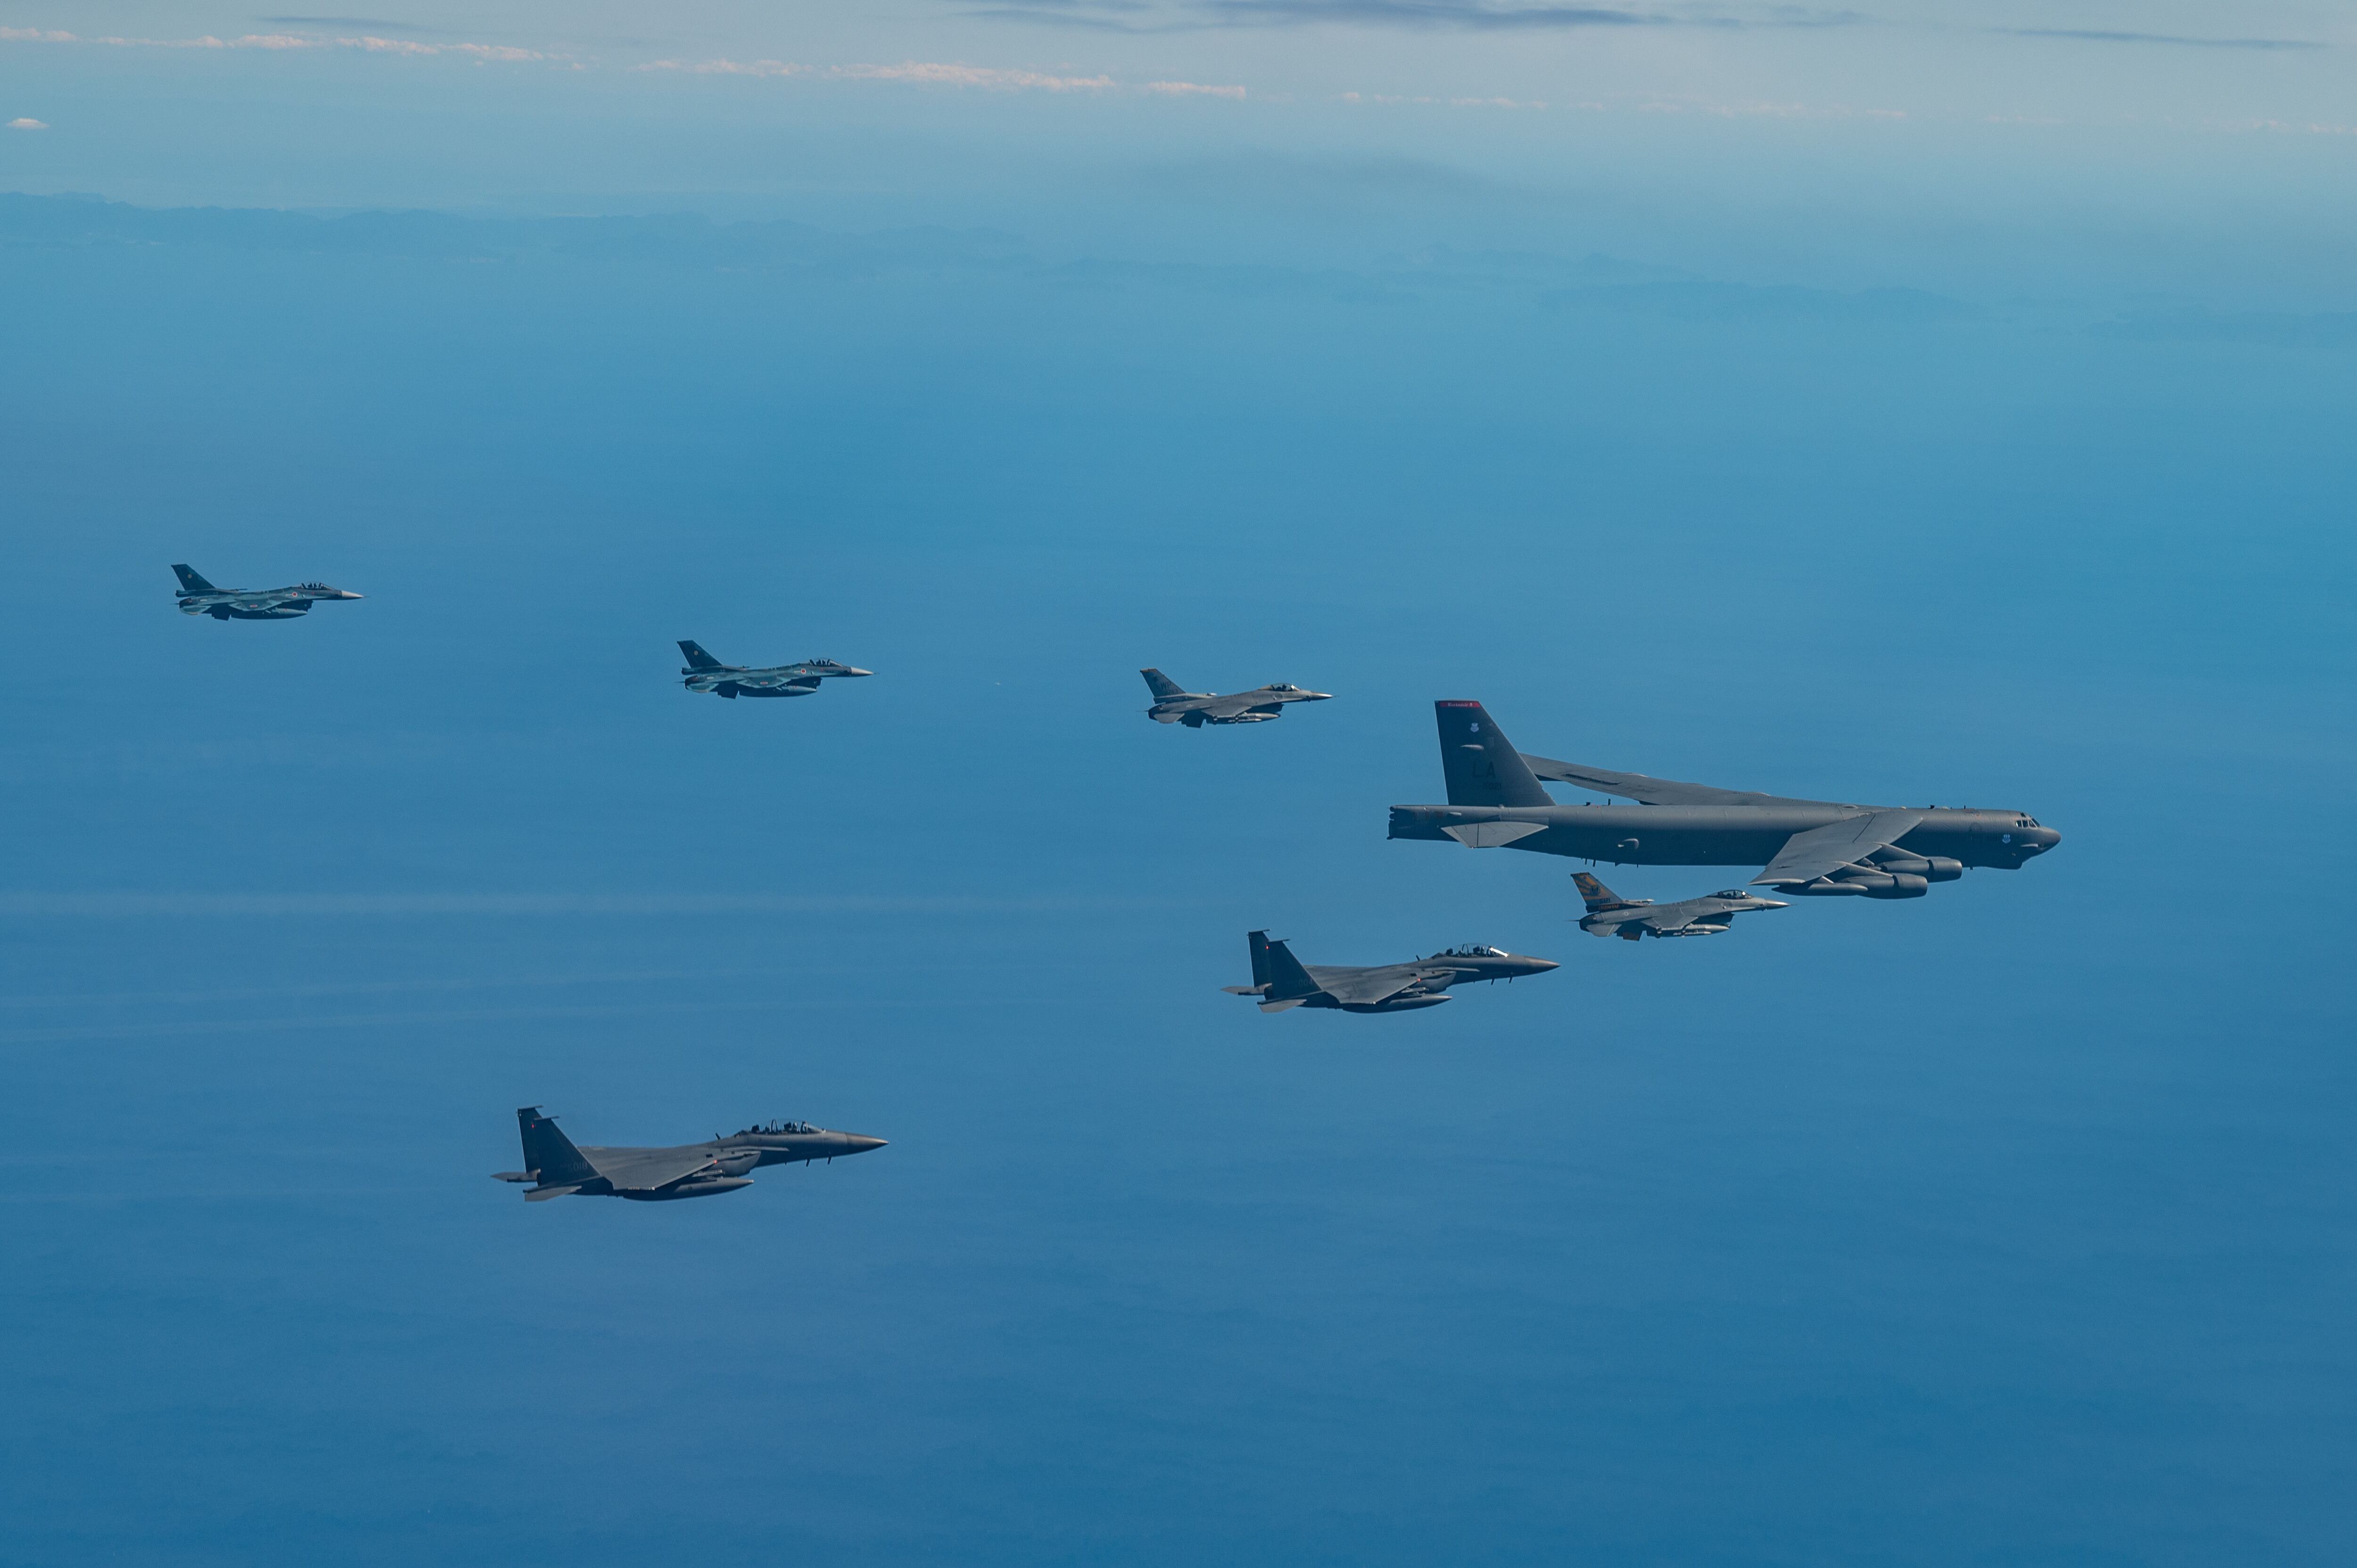 22/10/2023 October 22, 2023, East Sea, South Korea: A U.S. Air Force B-52H Stratofortress heavy bomber is escorted by U.S. F-16 Fighting Falcon fighter aircraft alongside South Korea F-15K fighters and Japanese F-2 fighter aircraft during a trilateral exercise, October 22, 2023 over the Korean Peninsula. POLITICA Europa Press/Contacto/Sra Karrla Parra/U.S. Air 